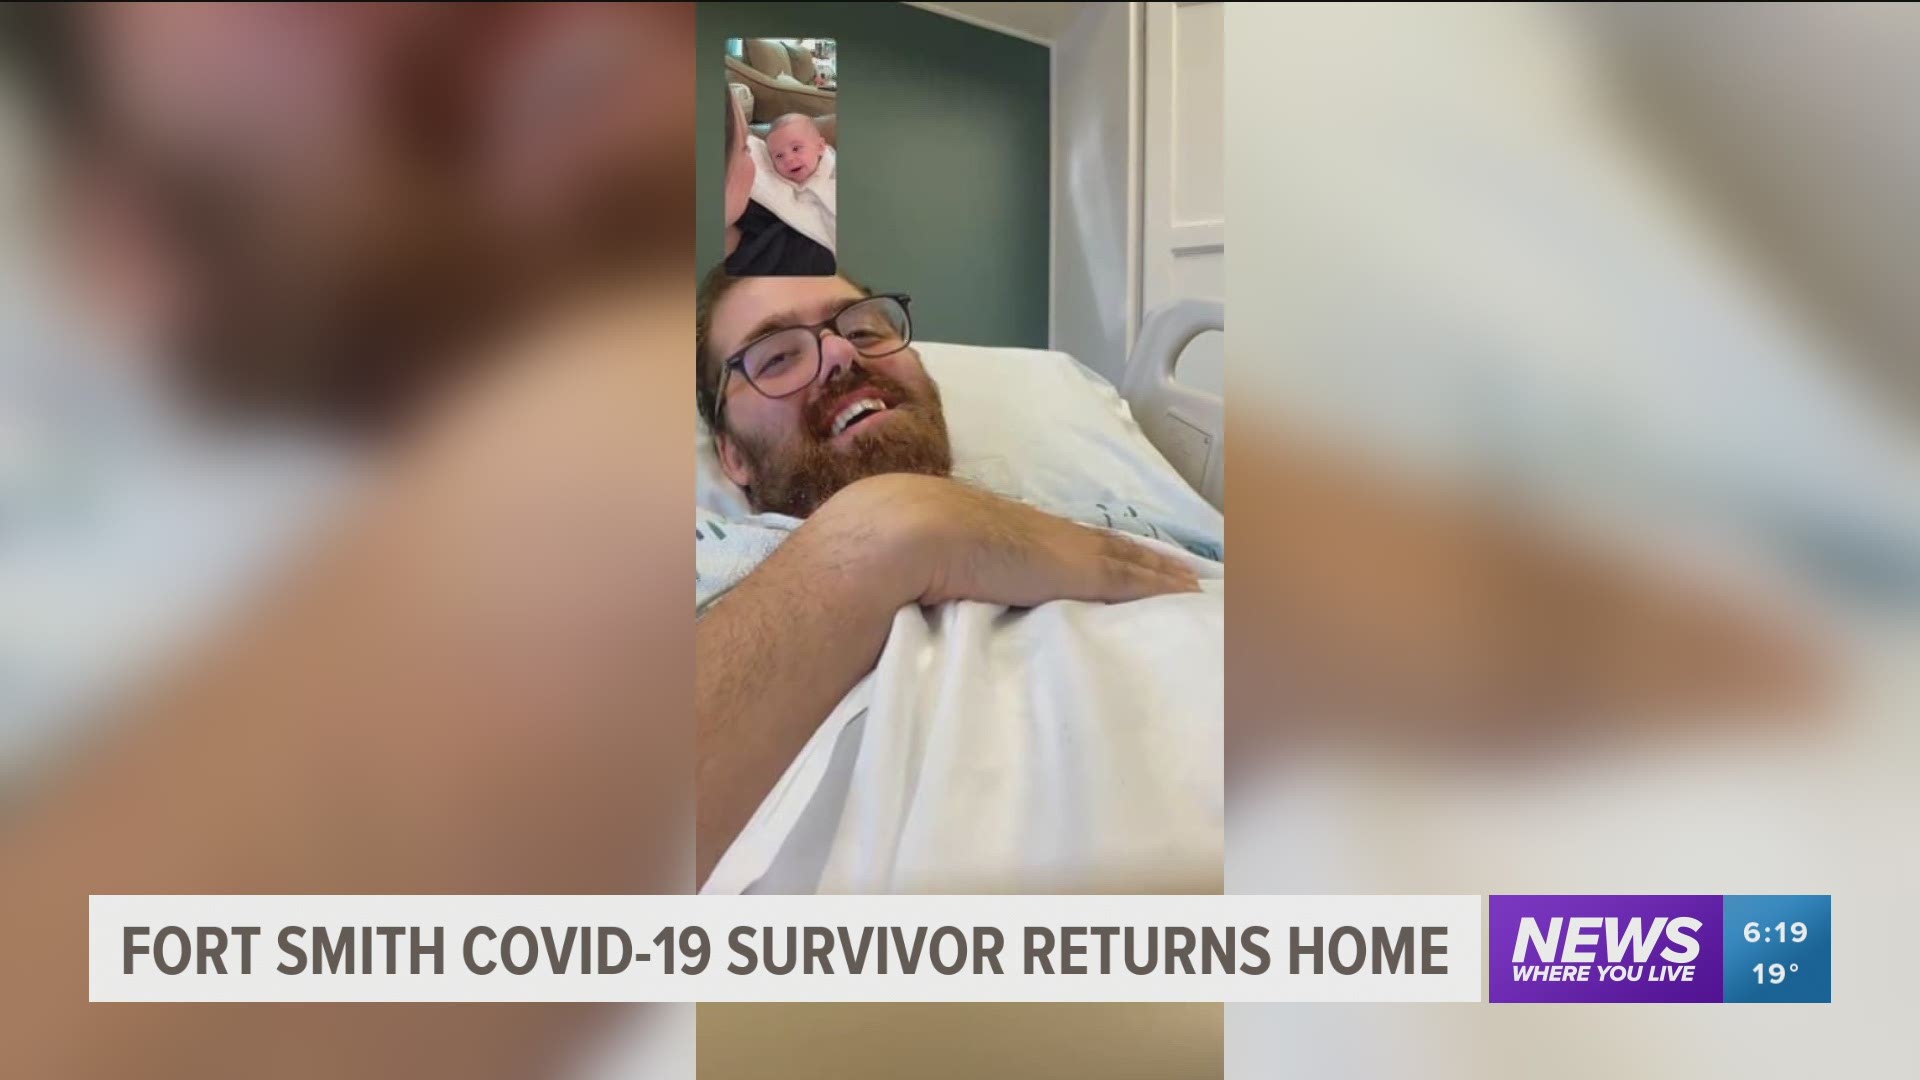 Fort Smith Covid-19 survivor returns home after three months in the hospital